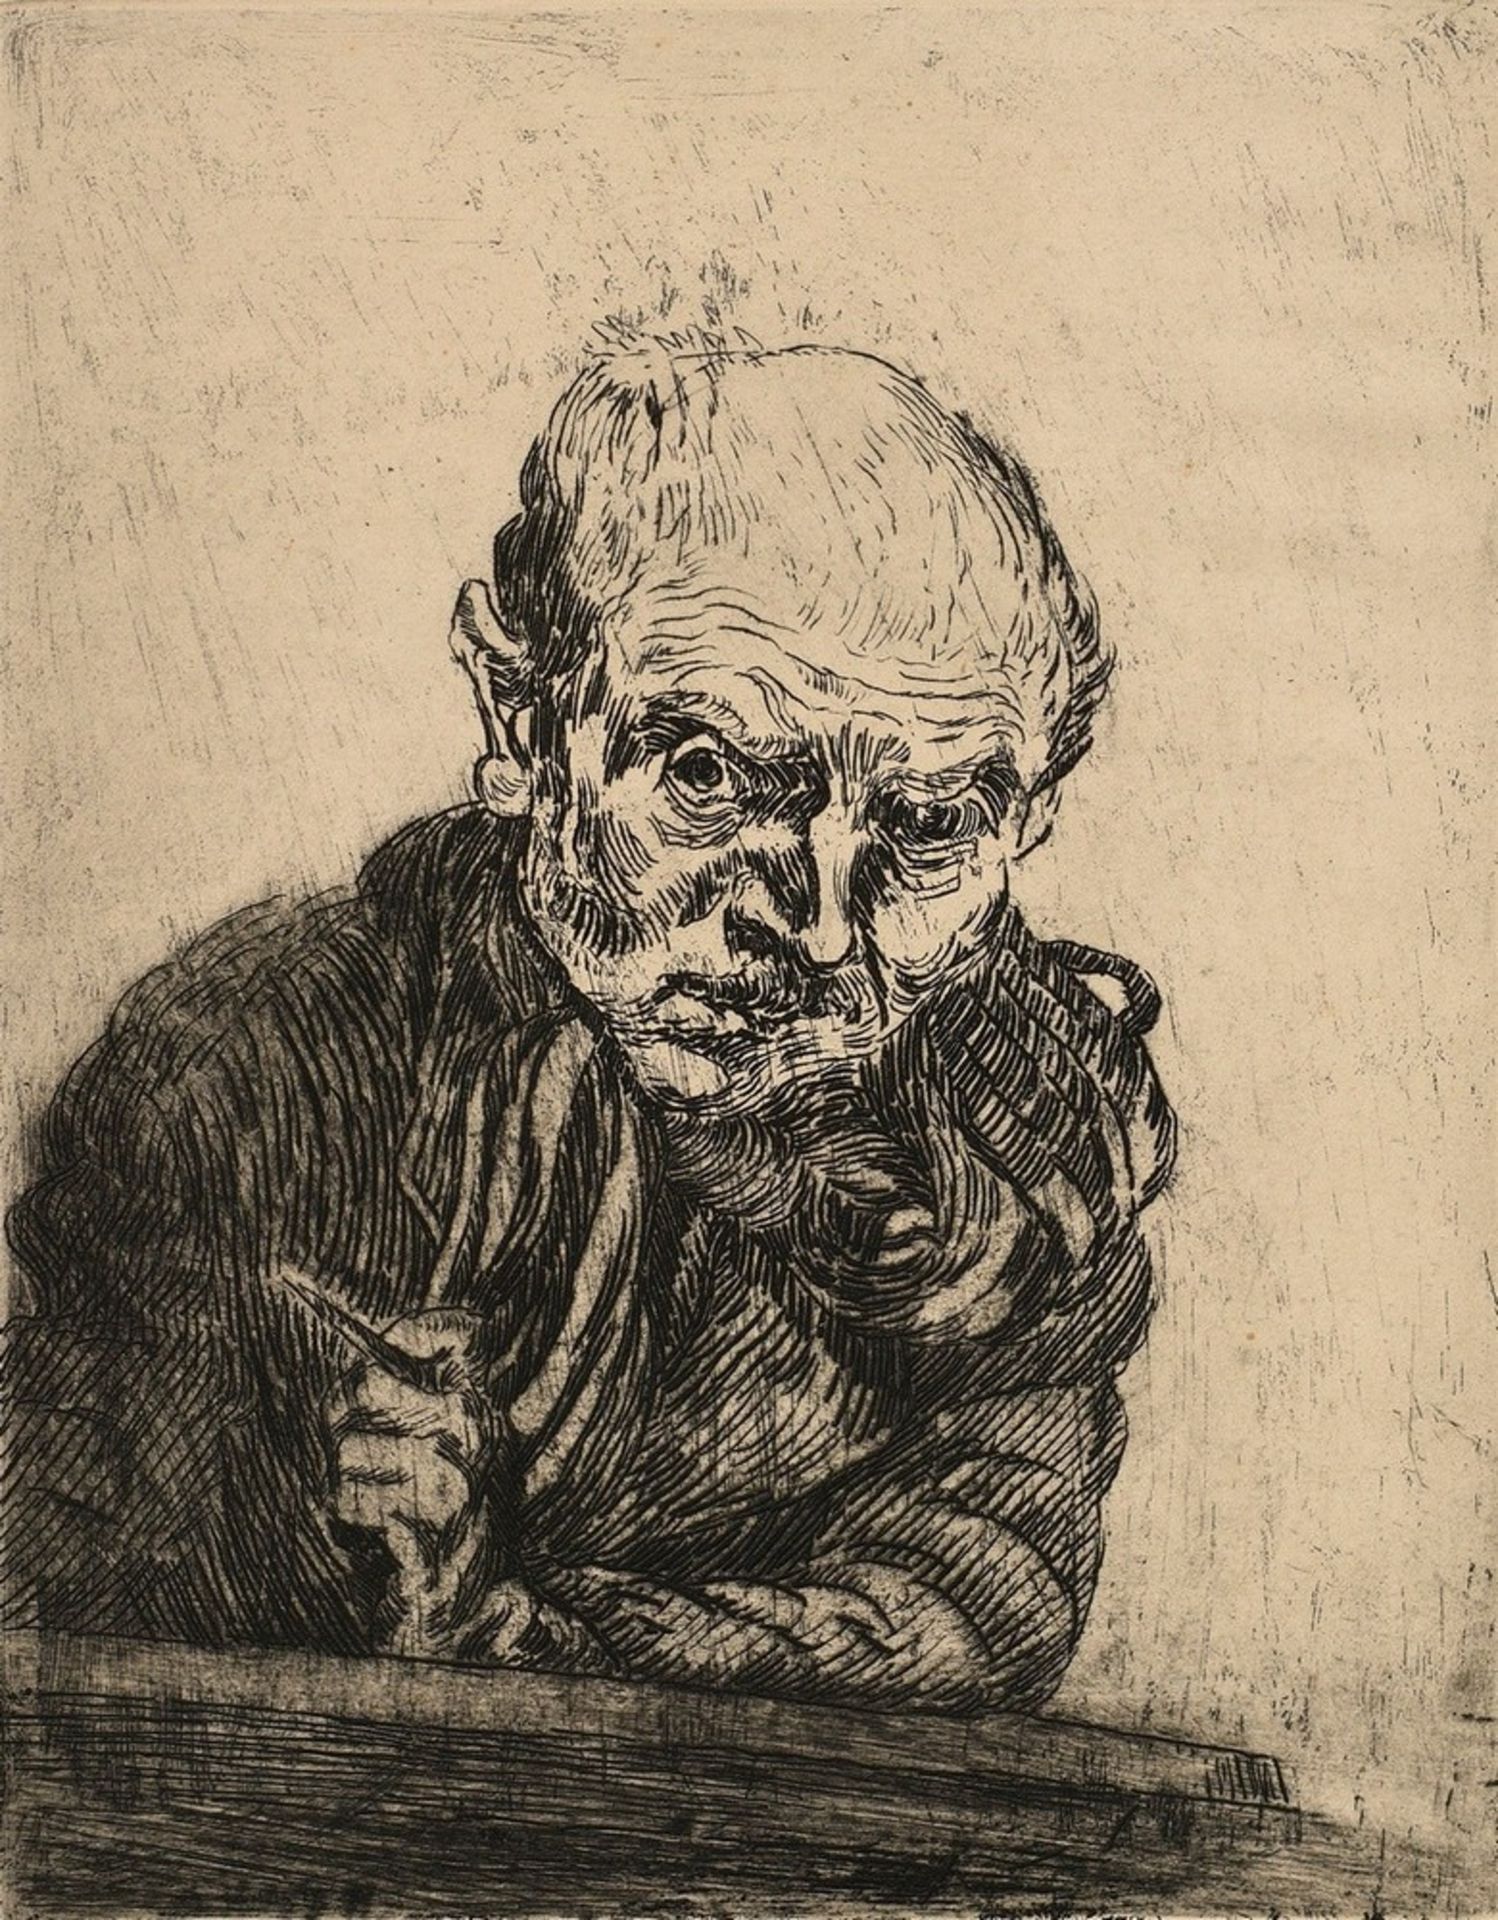 Meidner, Ludwig (1884-1966) 'Self-portrait with etching needle' 1923, sign. below, Griffelkunst, PM